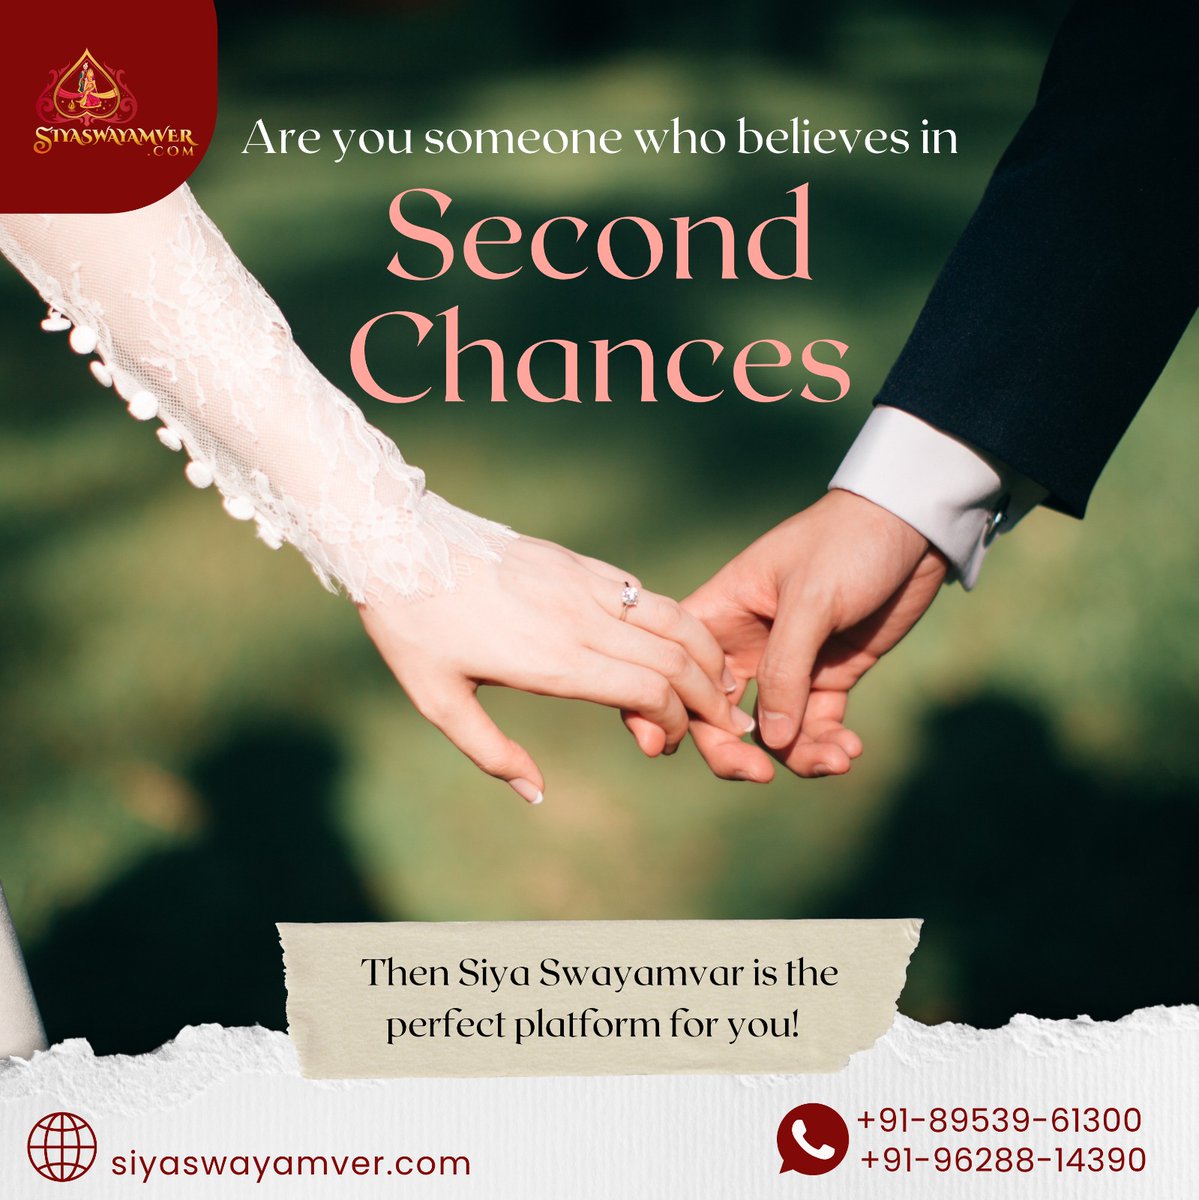 Our professional matrimonial site is here to help you find a partner who not only understands your past but also supports your future. 
.
 #SiyaSwayamvar #SecondChances #SecondLove #MatrimonialSite #FindYourSoulmate #HappyEnding #JoinUsNow